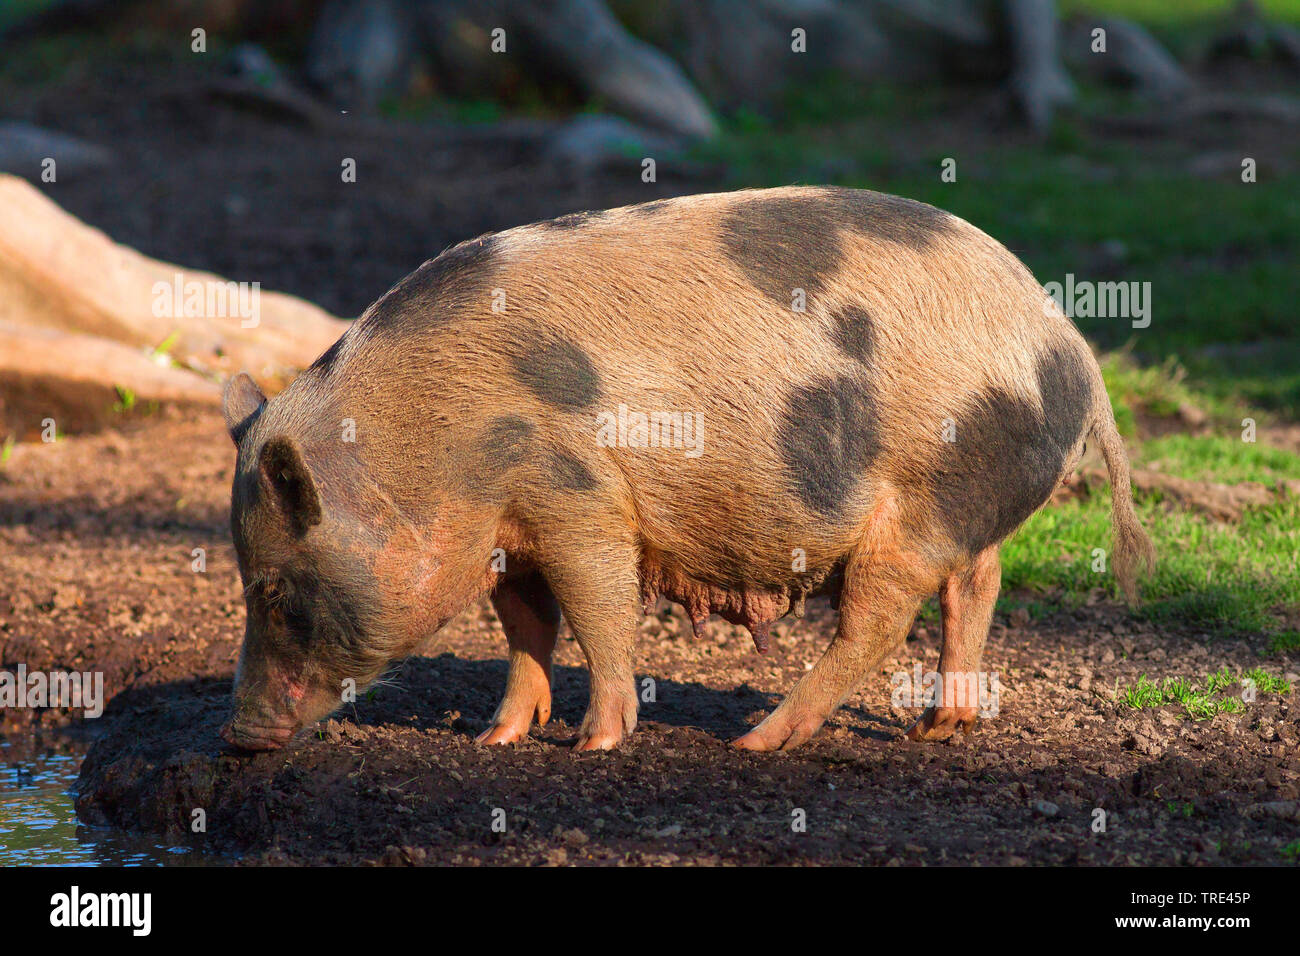 Vietnamese pot-bellied pig (Sus scrofa f. domestica), lateral view, Germany Stock Photo